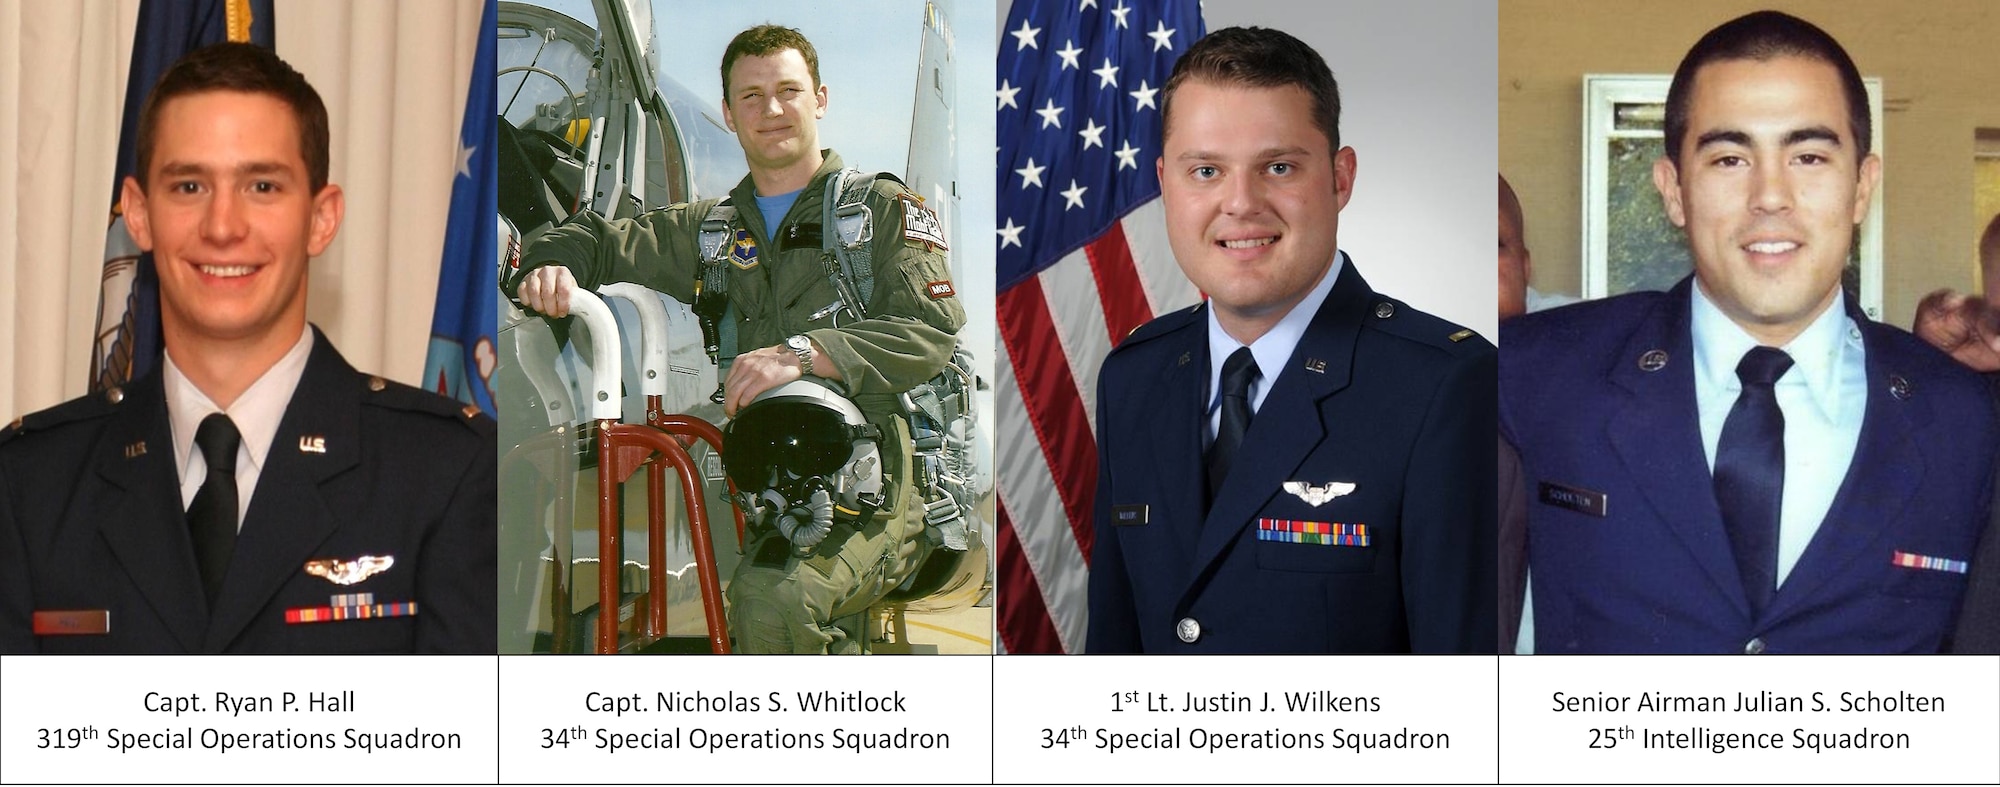 Capt. Ryan P. Hall from the 319th Special Operations Squadron, Capt. Nicholas S. Whitlock and 1st Lt. Justin J. Wilkens from the 34th Special Operations Squadron and Senior Airman Julian S. Scholten from the 25th Intelligence Squadron died Feb. 18 when their U-28A was involved in an accident near Camp Lemonnier, Djibouti, located in the Horn of Africa. No other personnel were on board the aircraft. (U.S. Air Force photo illustration by Senior Airman Joe McFadden) (RELEASED)
